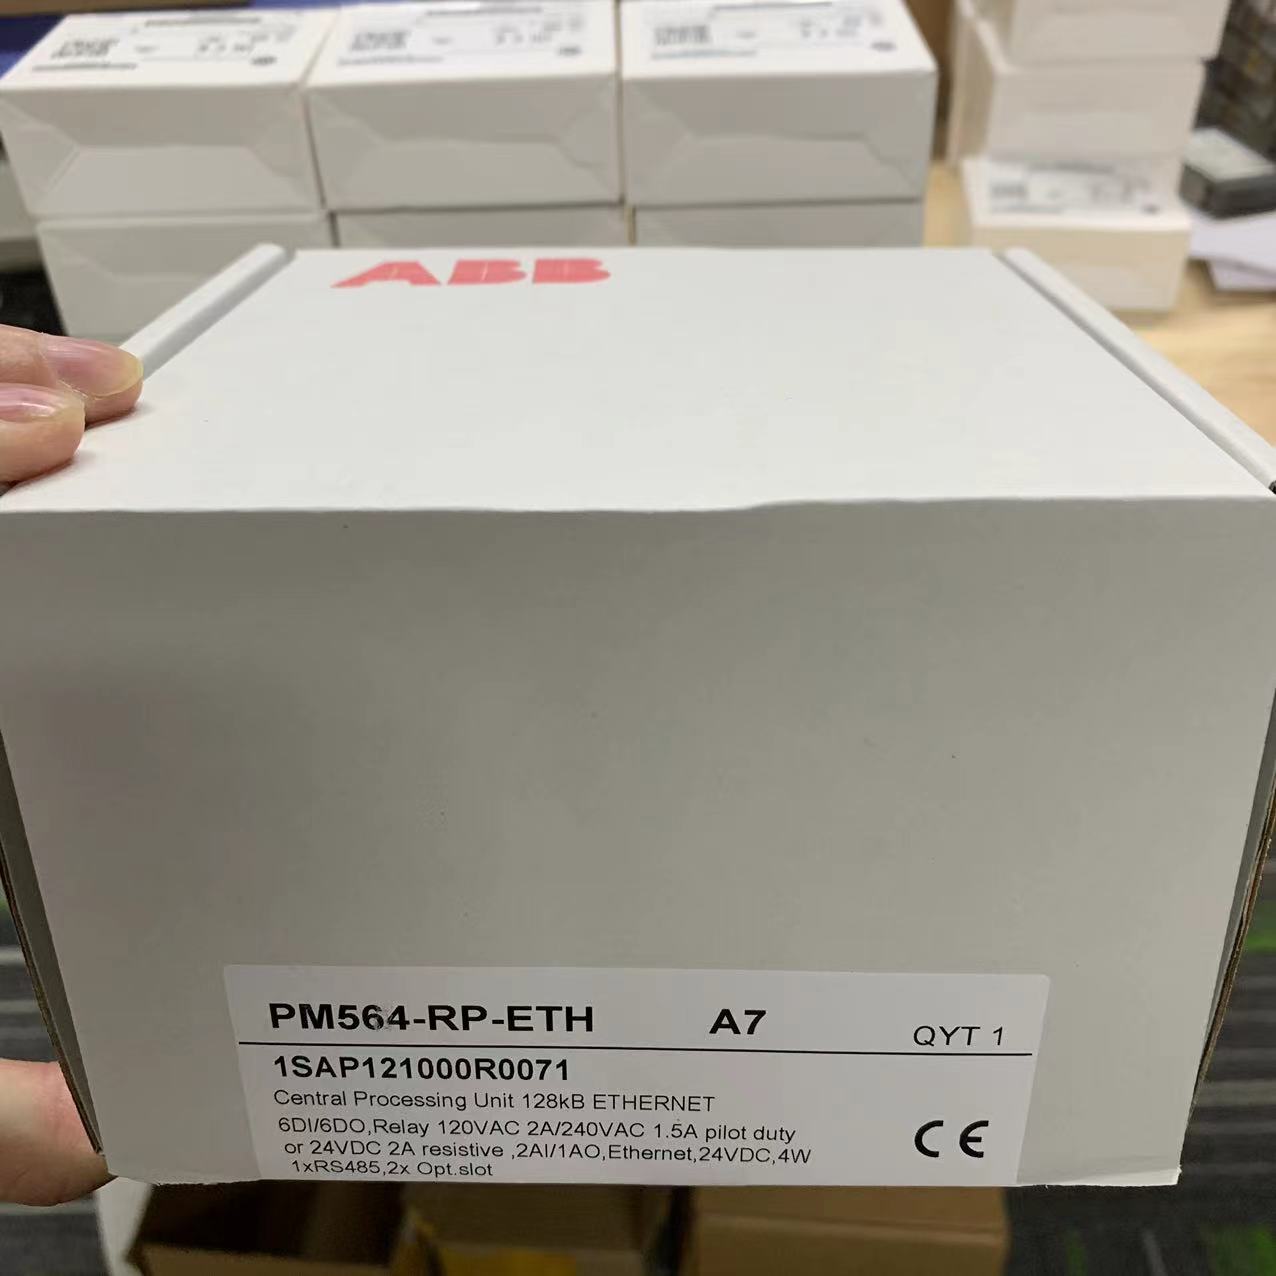 Ships Today 1PC New Sealed ABB PM564-RP-ETH 1SAP121000R0071 Expedited Shipping